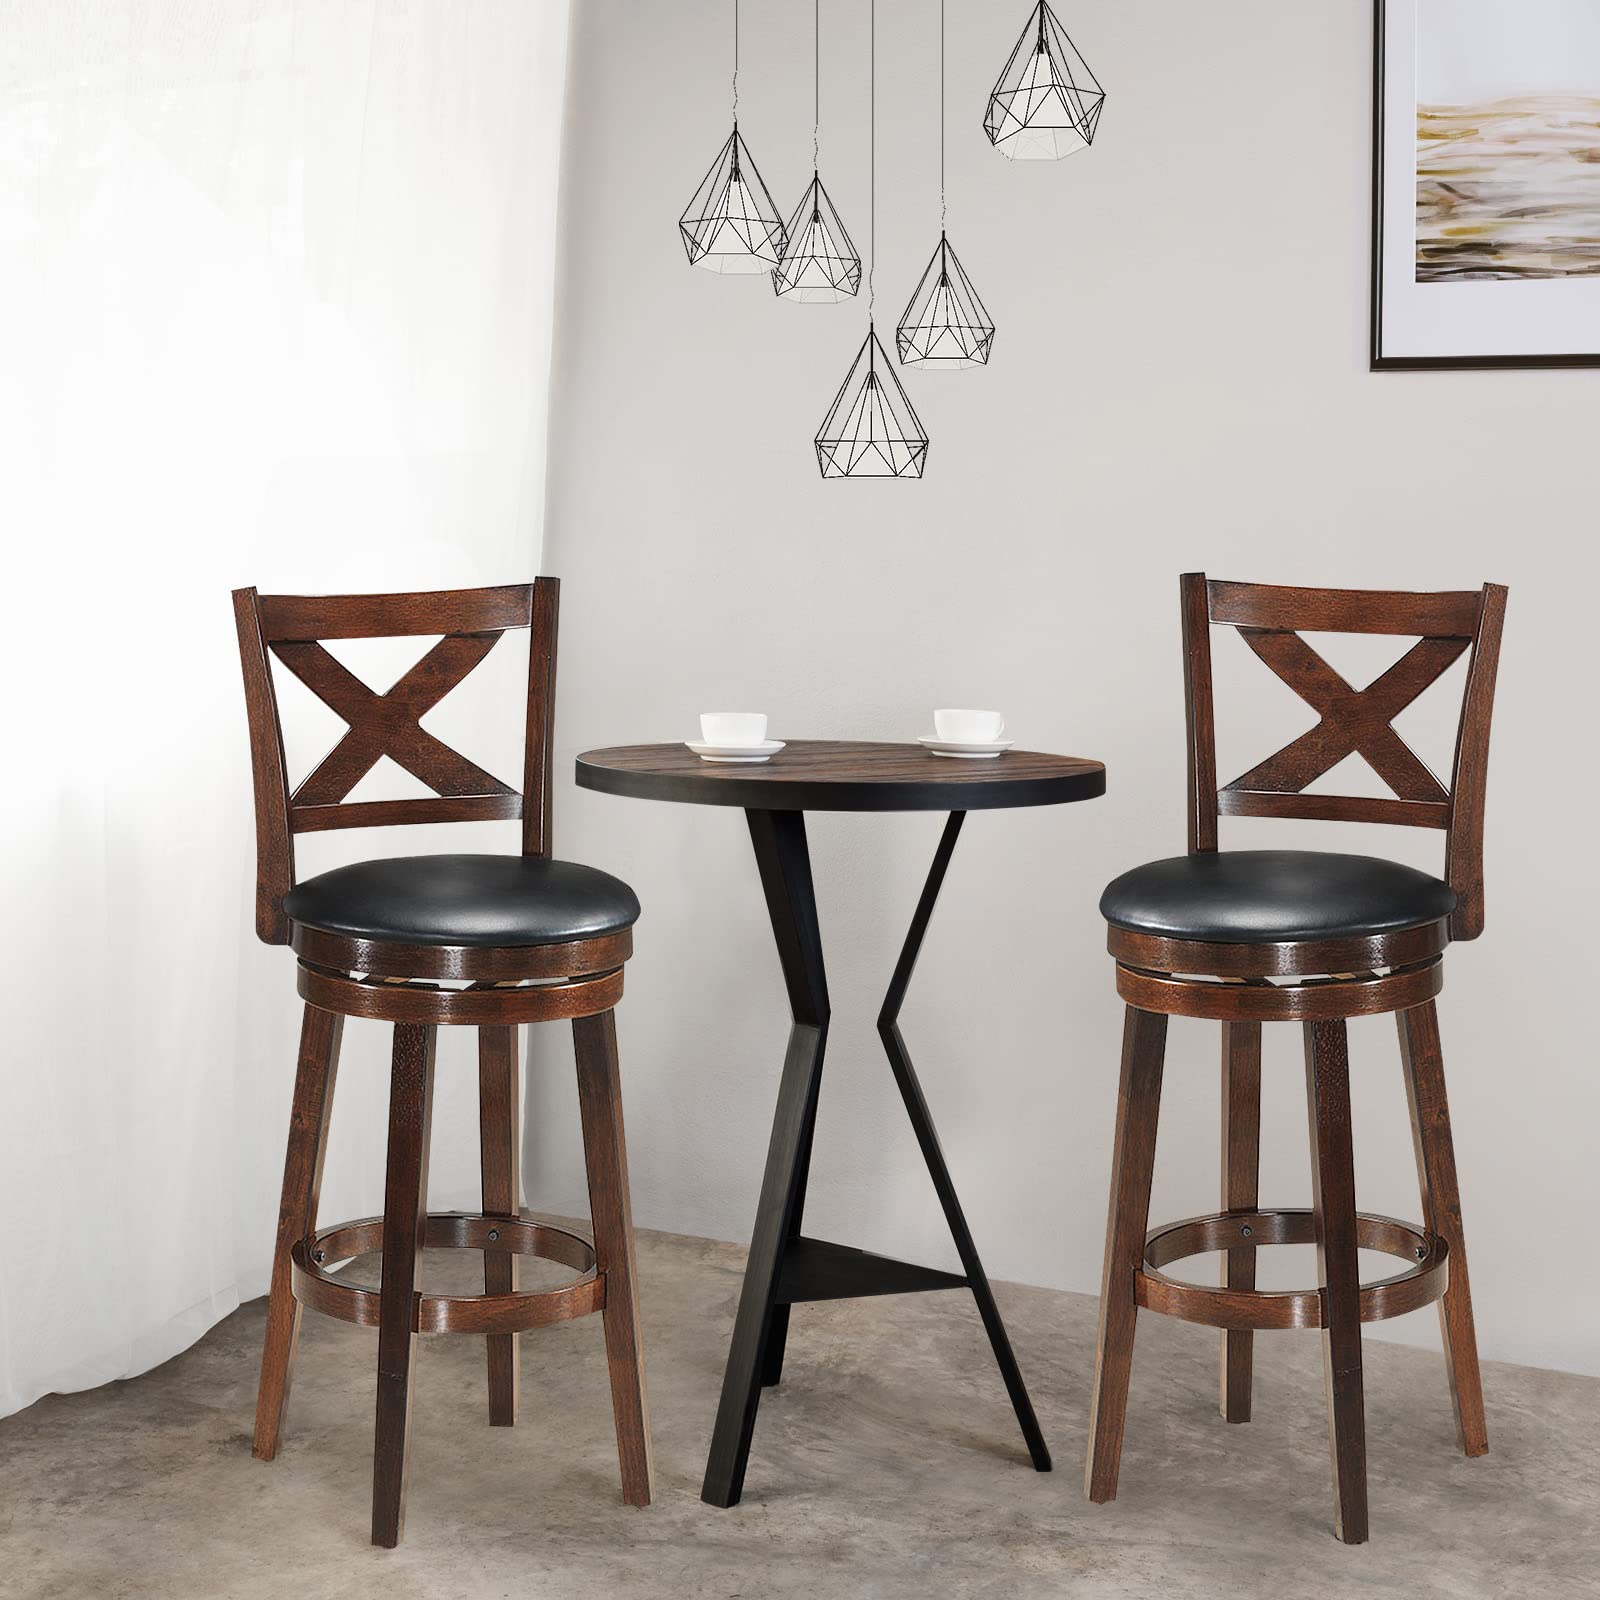 Counter Height Dining Chair, Fabric Upholstered 360 Degree Swivel, PVC Cushioned Seat, Perfect for Dining and Living Room